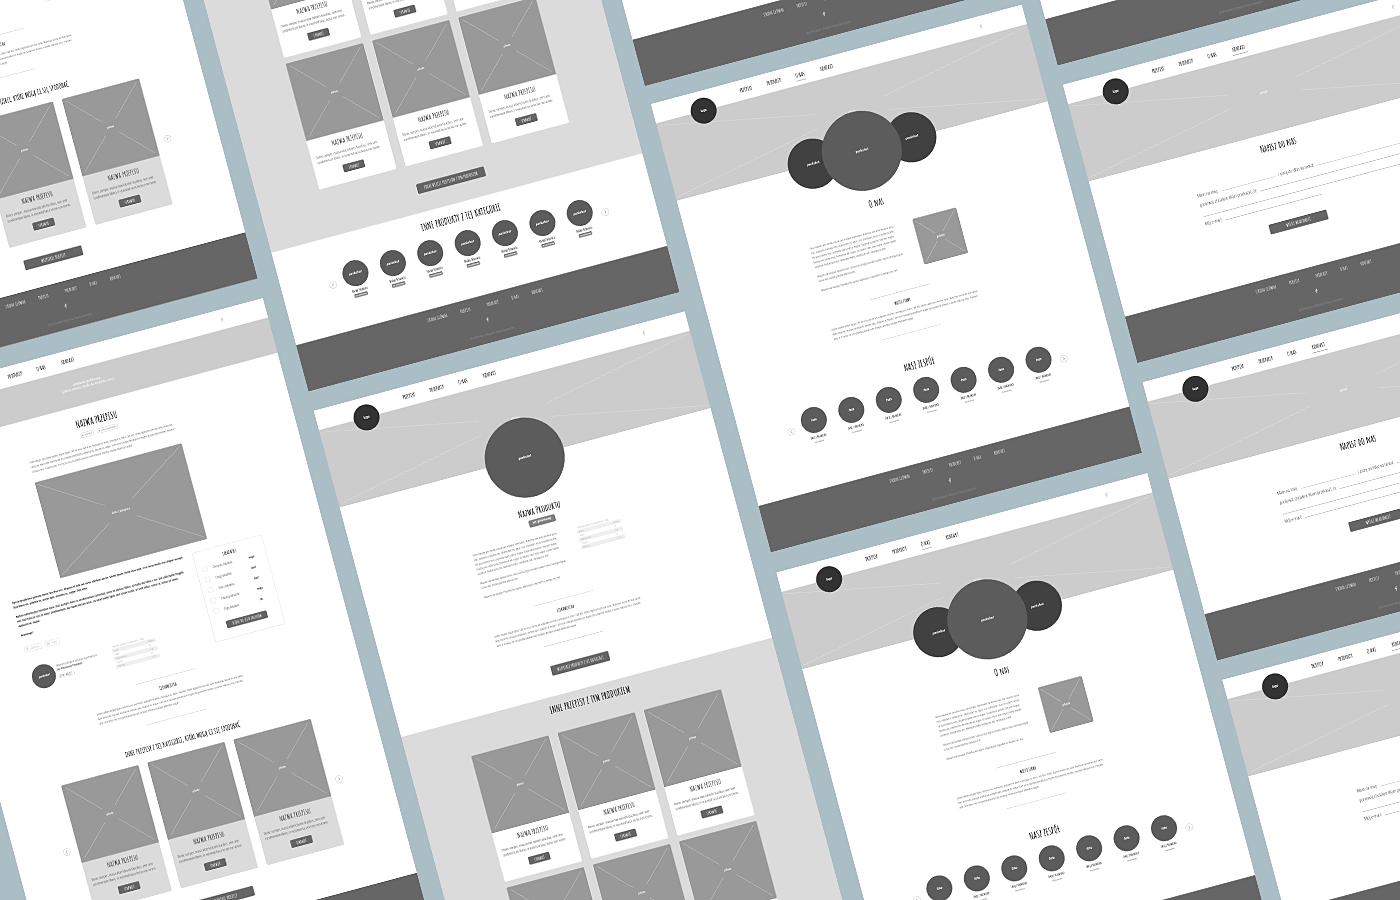 product design  UX design UX strategy information architecture  wireframes interactive prototype